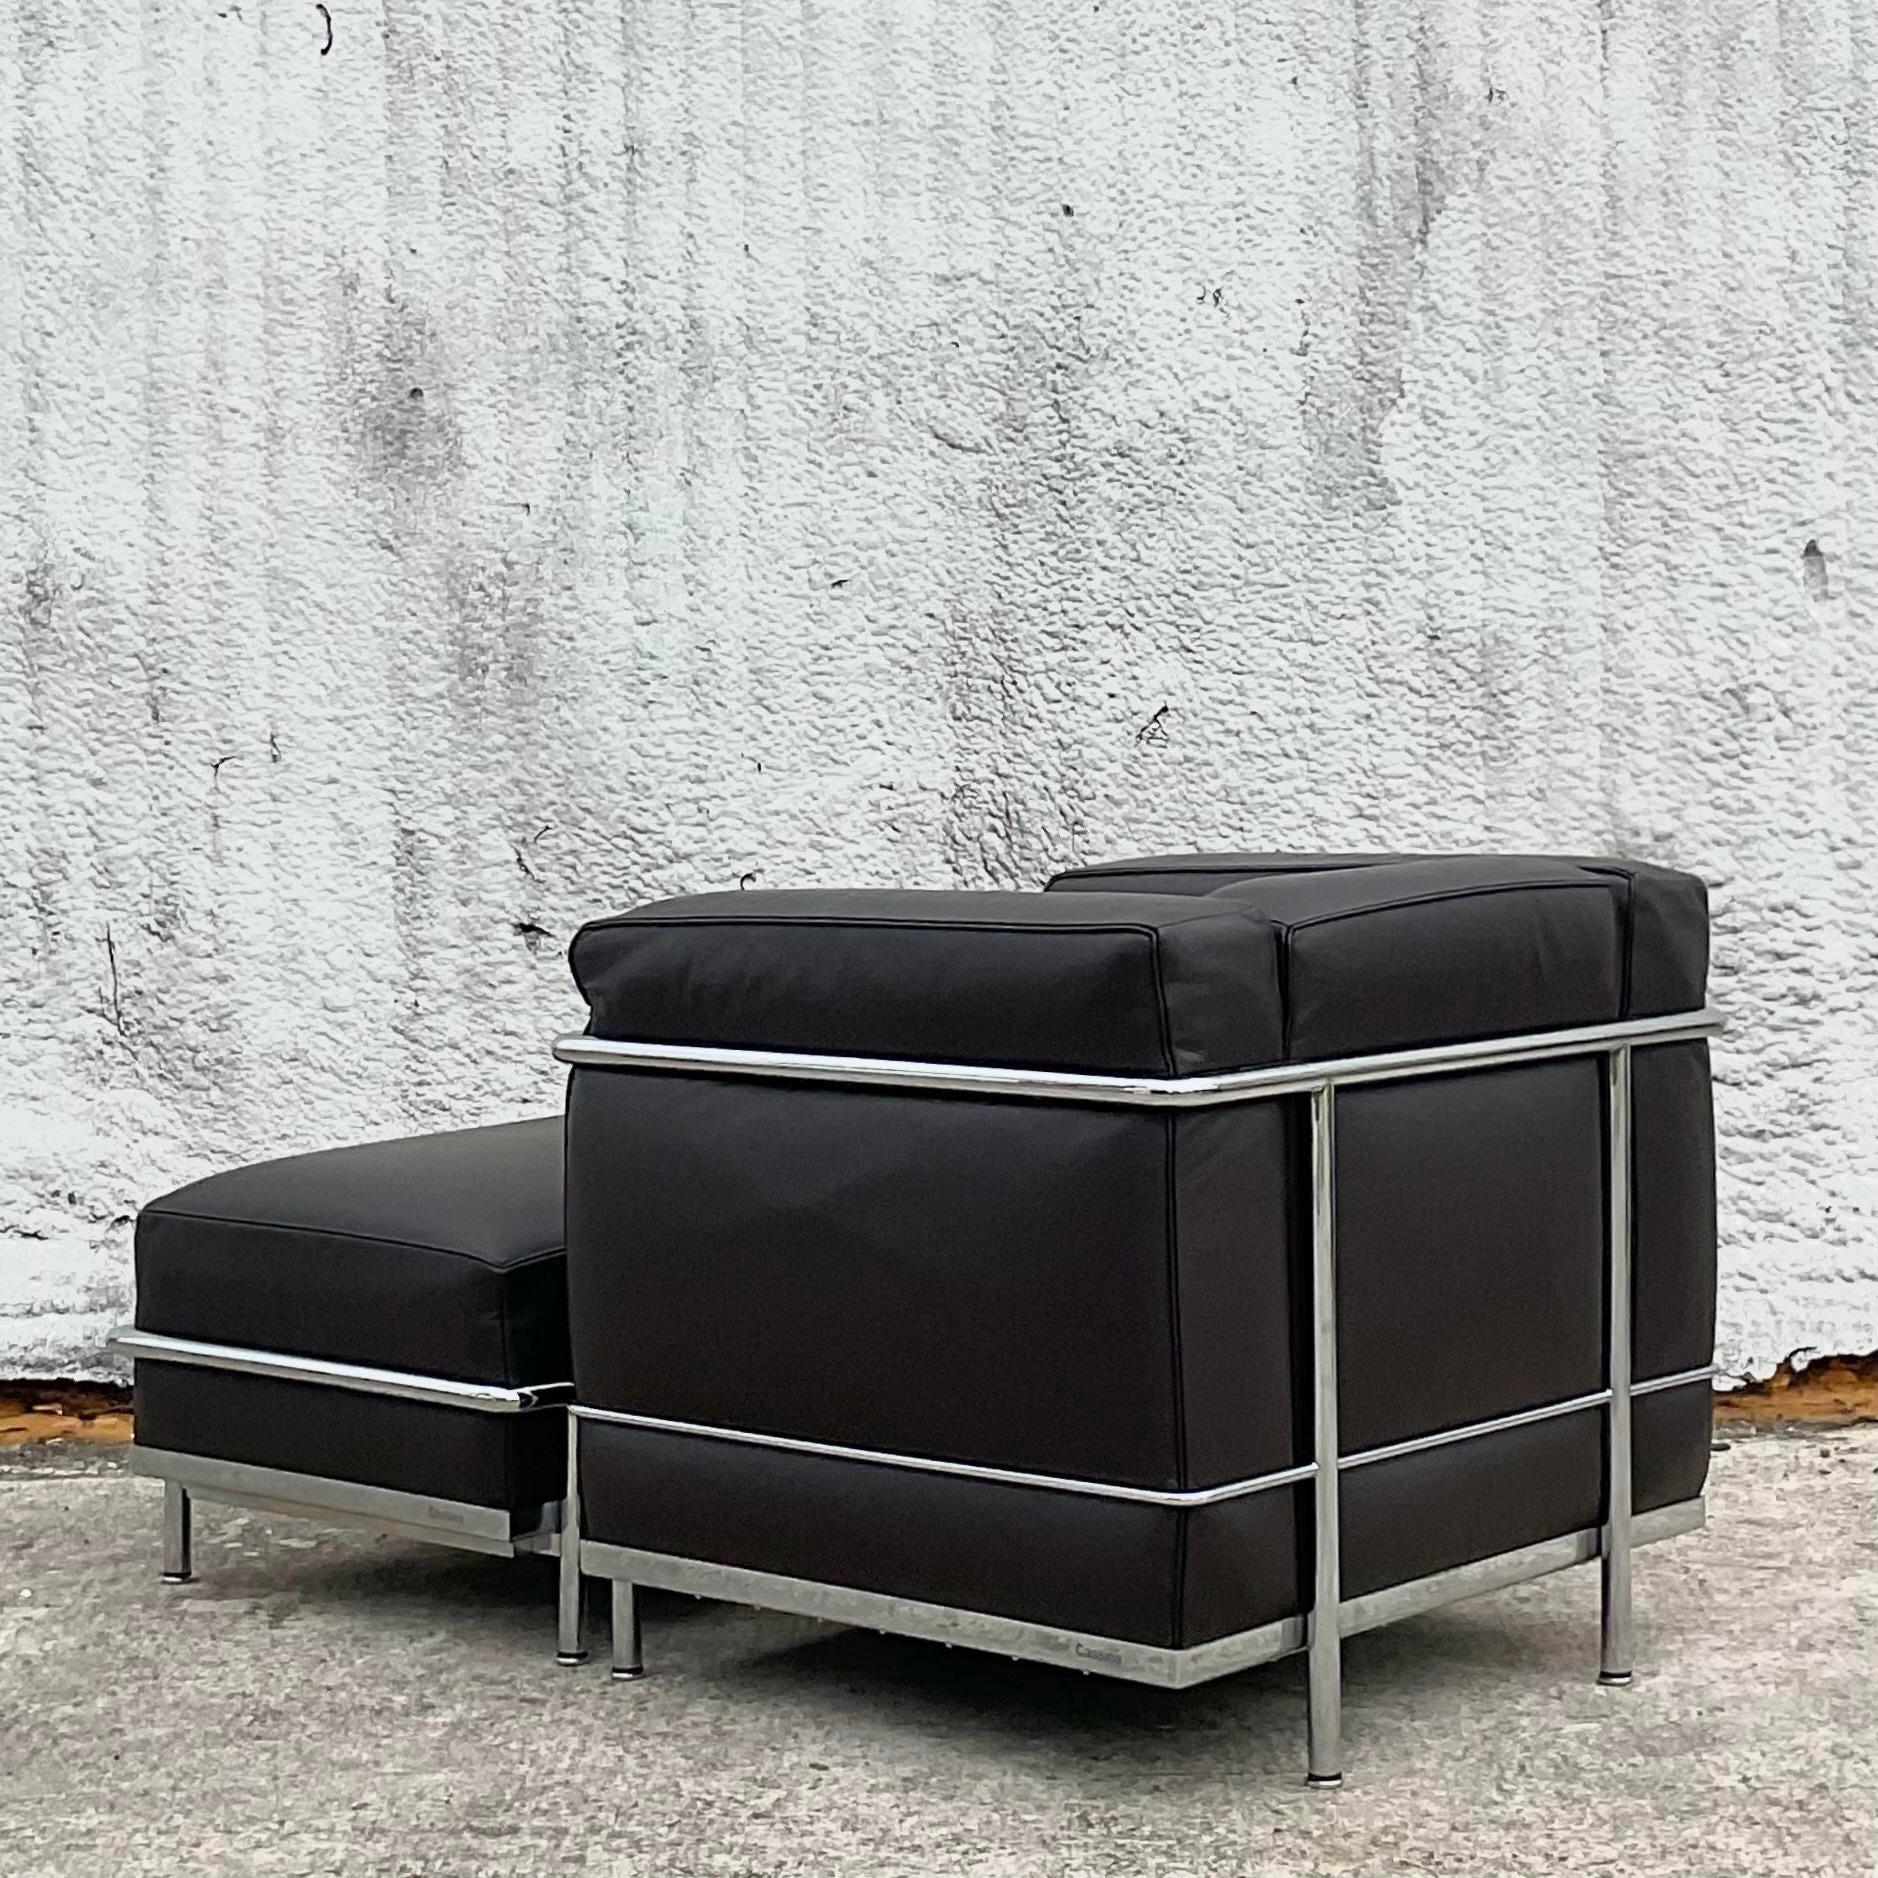 A fantastic vintage Contemporary chair and ottoman. Made in Italy by the Cassina group and tagged below. The classic Petite Modele design. Chic dark charcoal leather in the iconic Le Corbusier shape. Acquired from a Palm Beach estate.

Ottoman